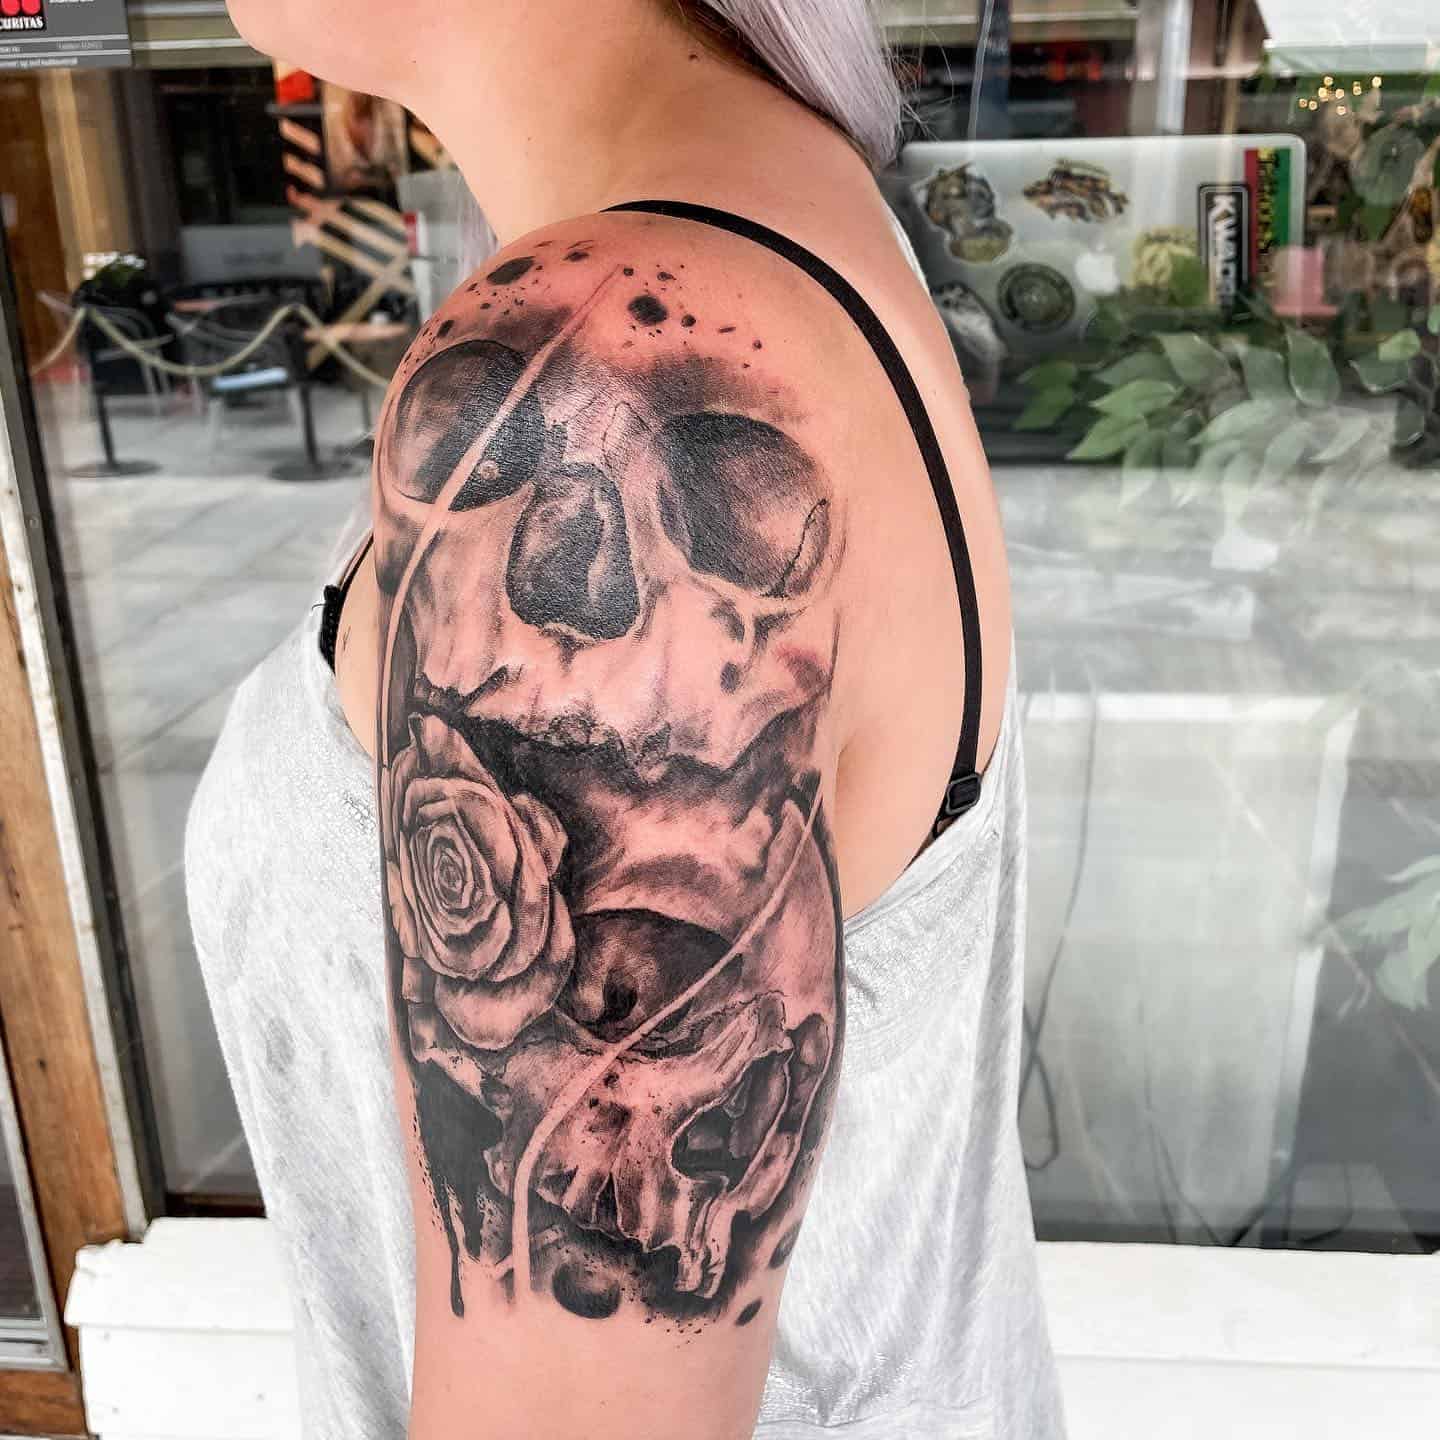 Skulls and Roses